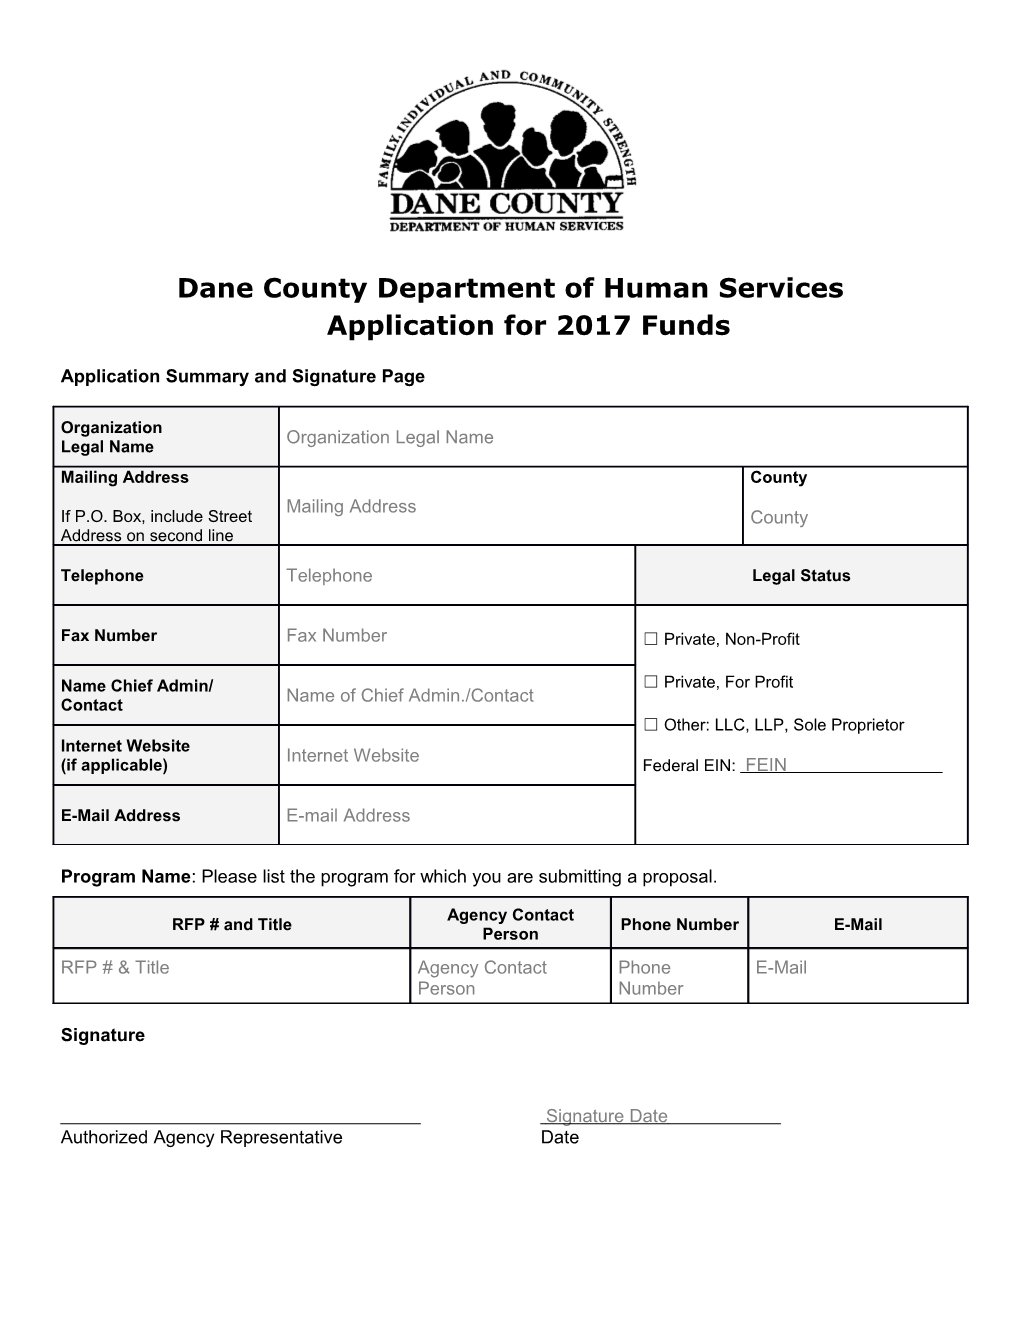 DCDHS Application for 2018 Funds